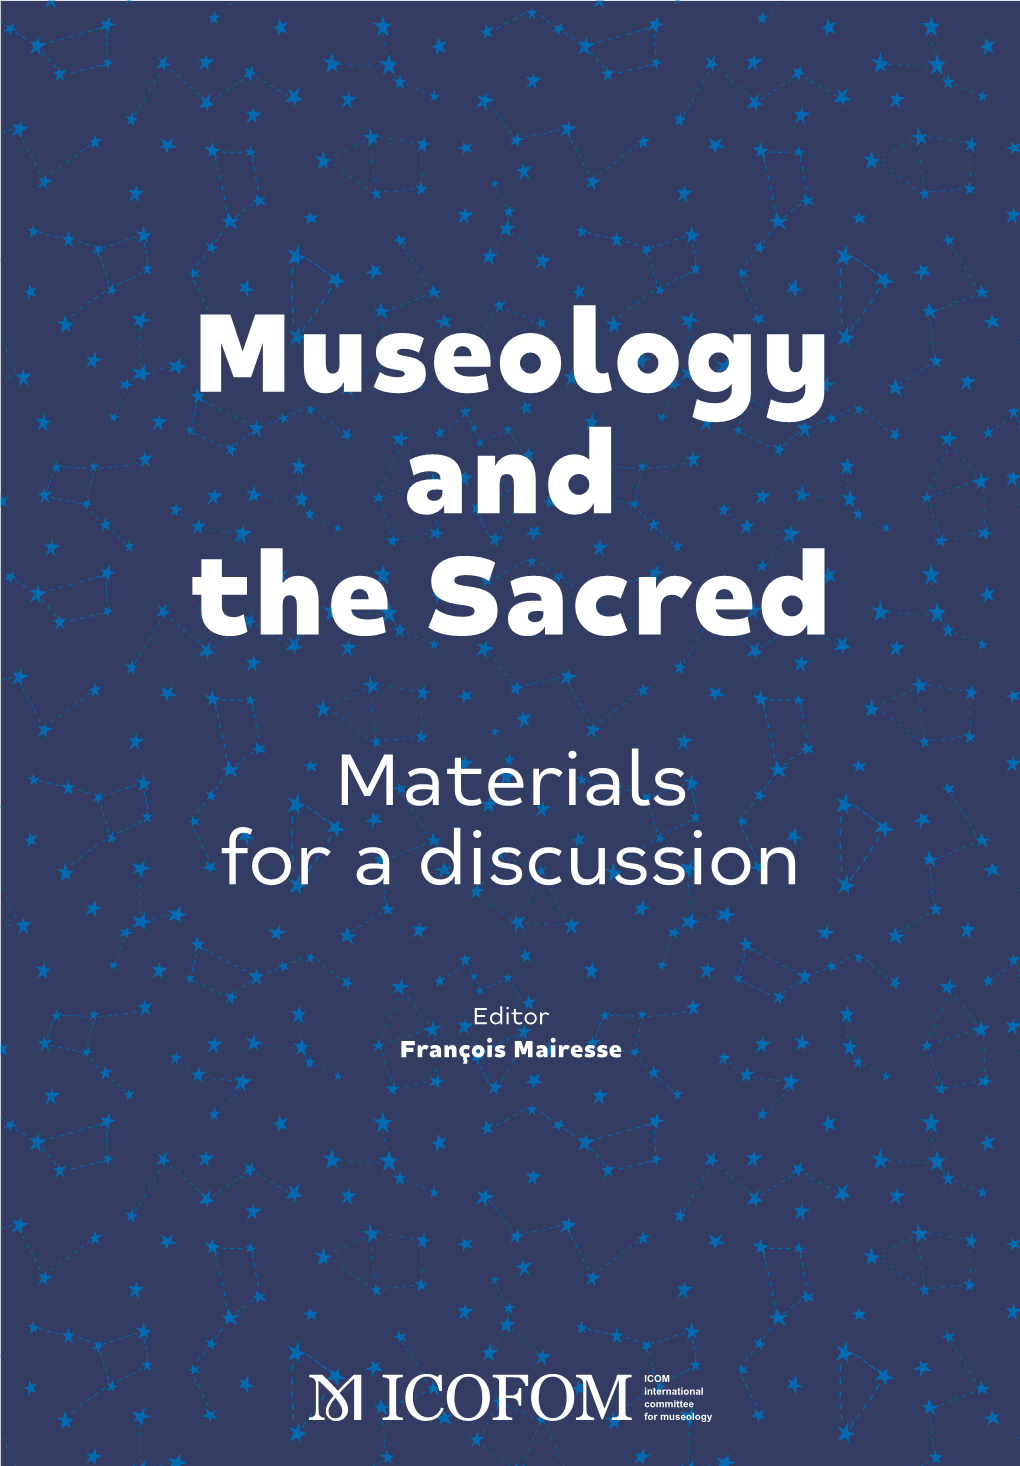 Museology and the Sacred Materials for a Discussion